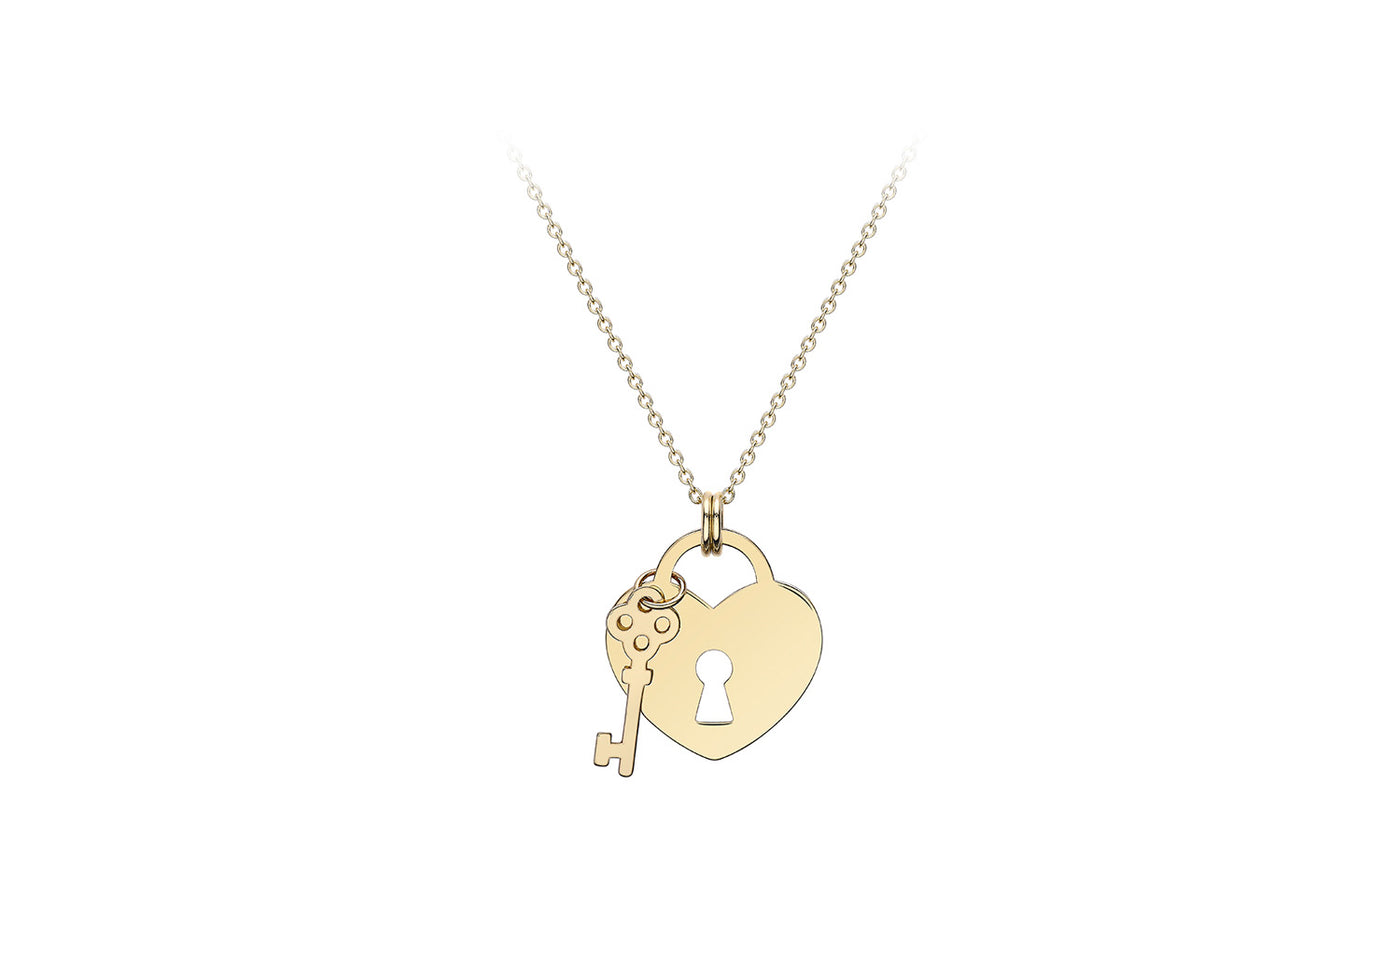 9K Yellow Gold Solid Padlock & Key Necklace 41-43cm